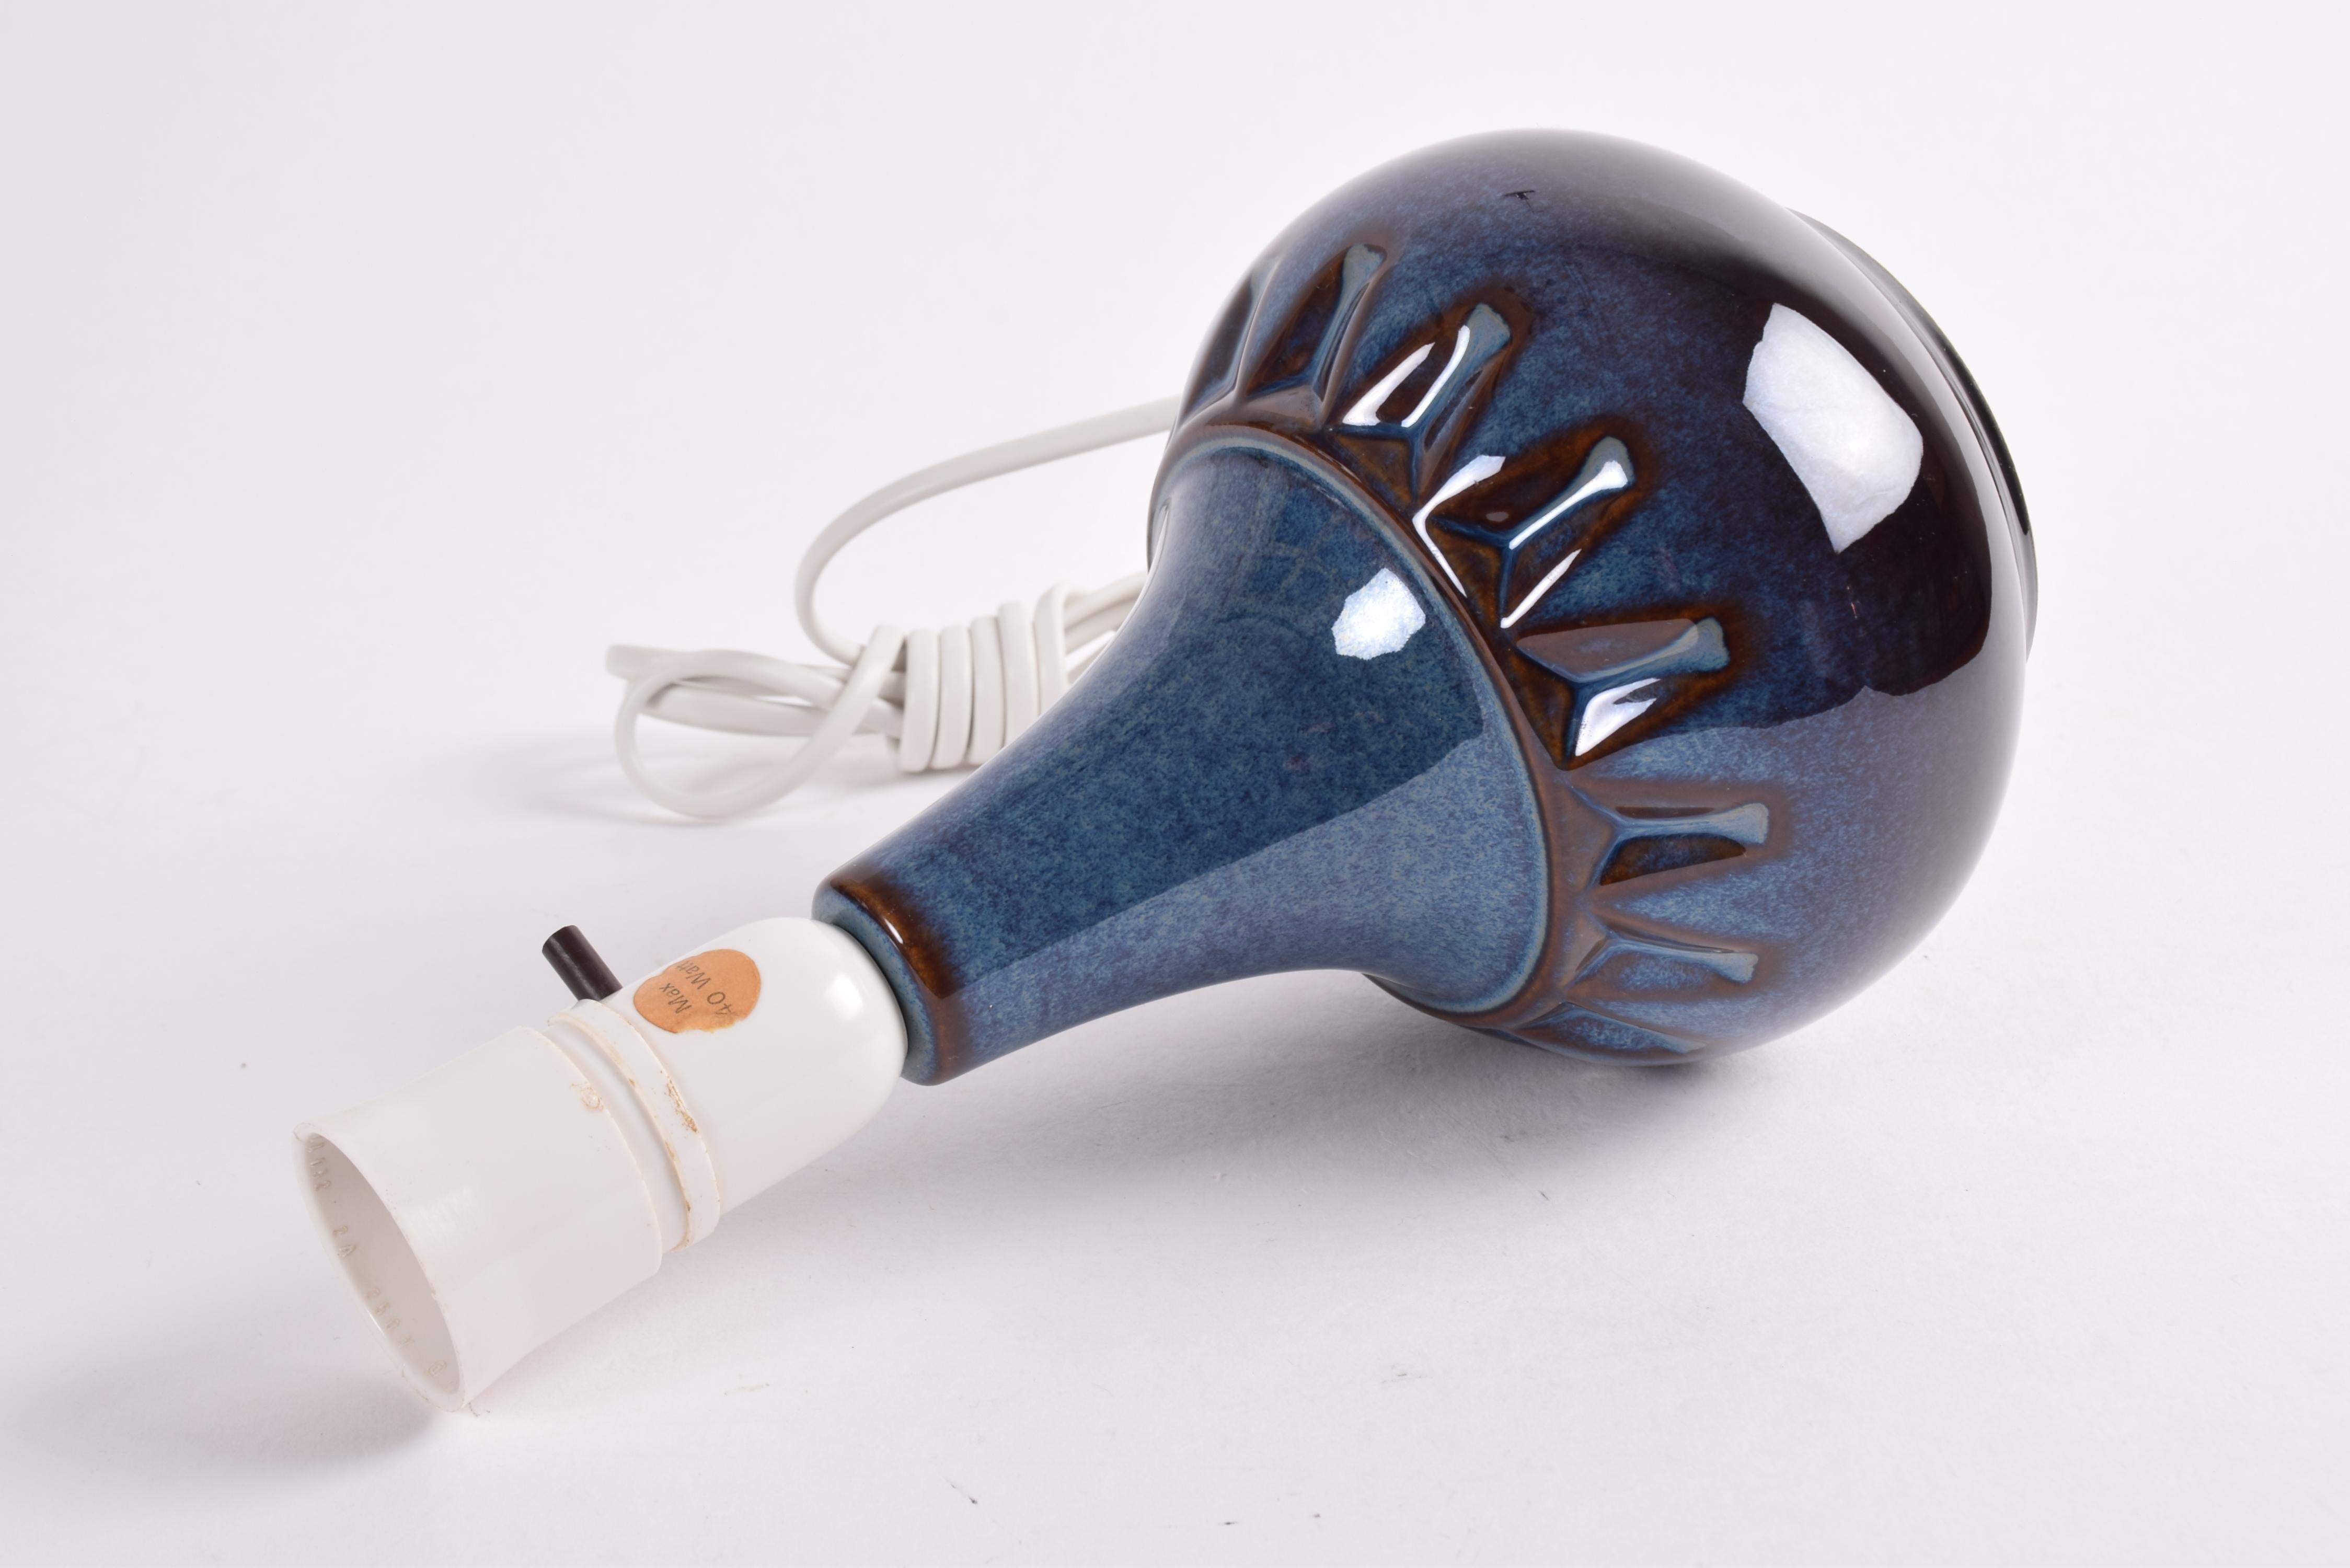 Stoneware Danish Midcentury Søholm Ceramic Table Lamp in Blue, Budded Shape, 1960s For Sale